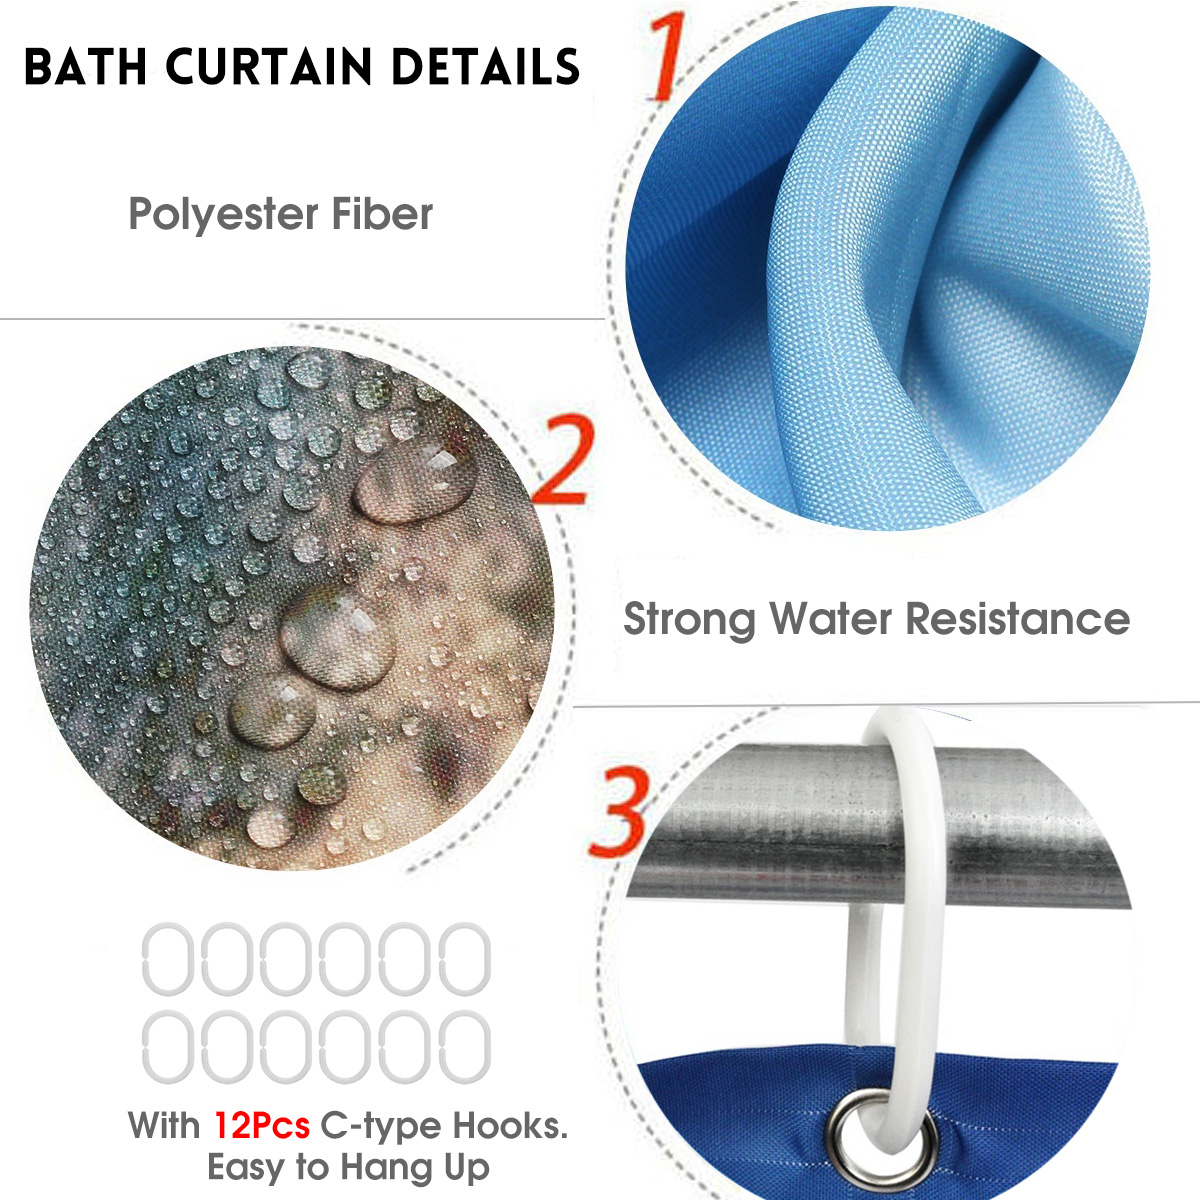 Bamboo-Stone-Non-Slip-Rug-Toilet-Lid-Cover-Bath-Mat-Shower-Curtain-With-12-Rings-1390072